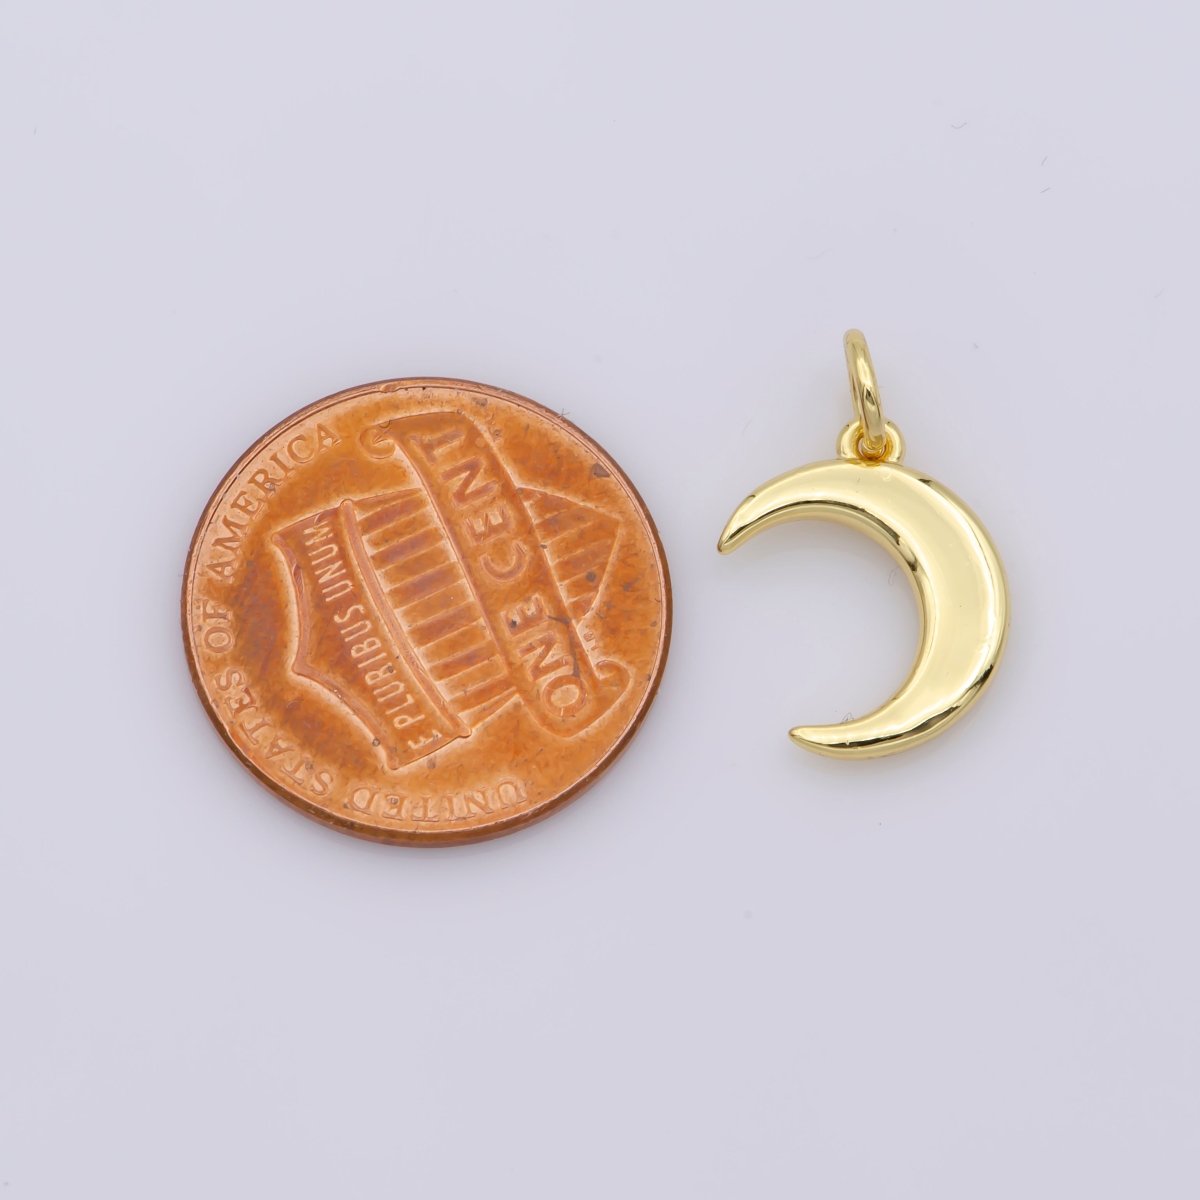 Dainty 14k Gold Filled Moon charm - Small Moon pendant - Crescent Moon pendant for Necklace Bracelet Earring Charm Supply Celestial Jewelry, D-461 - DLUXCA